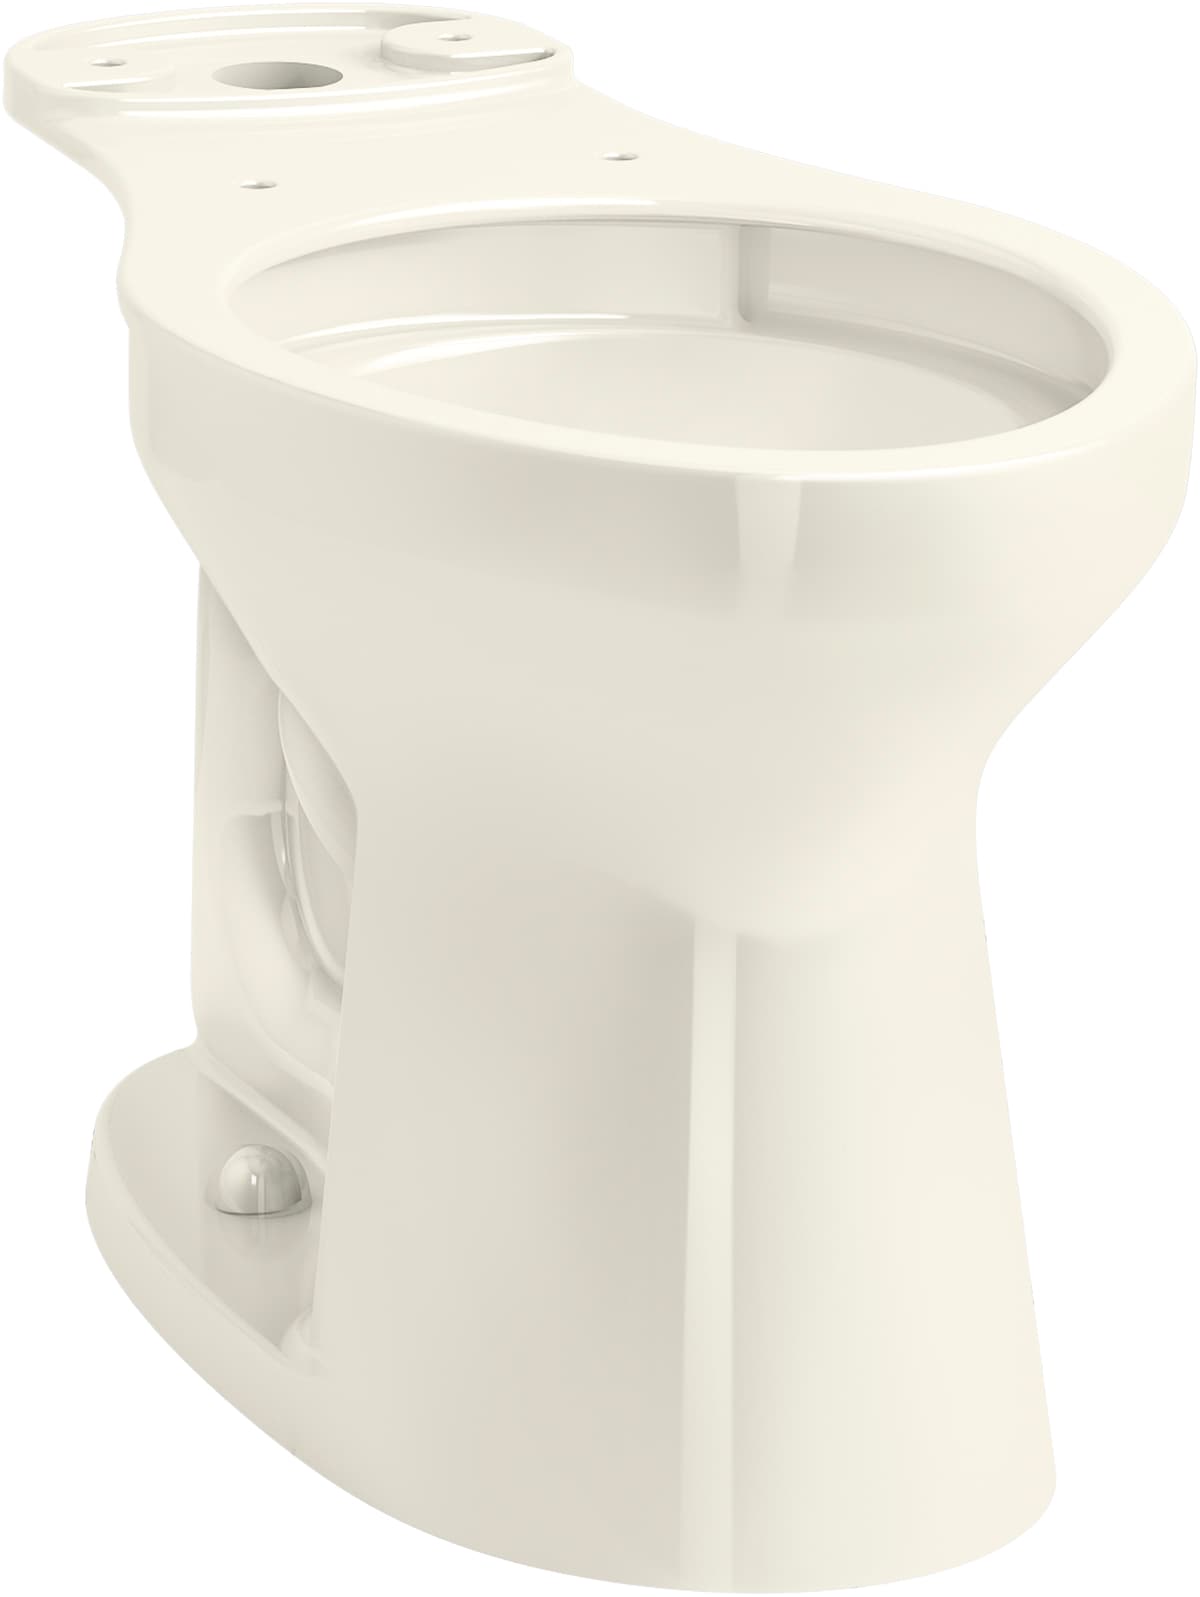 KOHLER Cimarron Biscuit Elongated Chair Height Toilet Bowl 12-in Rough ...